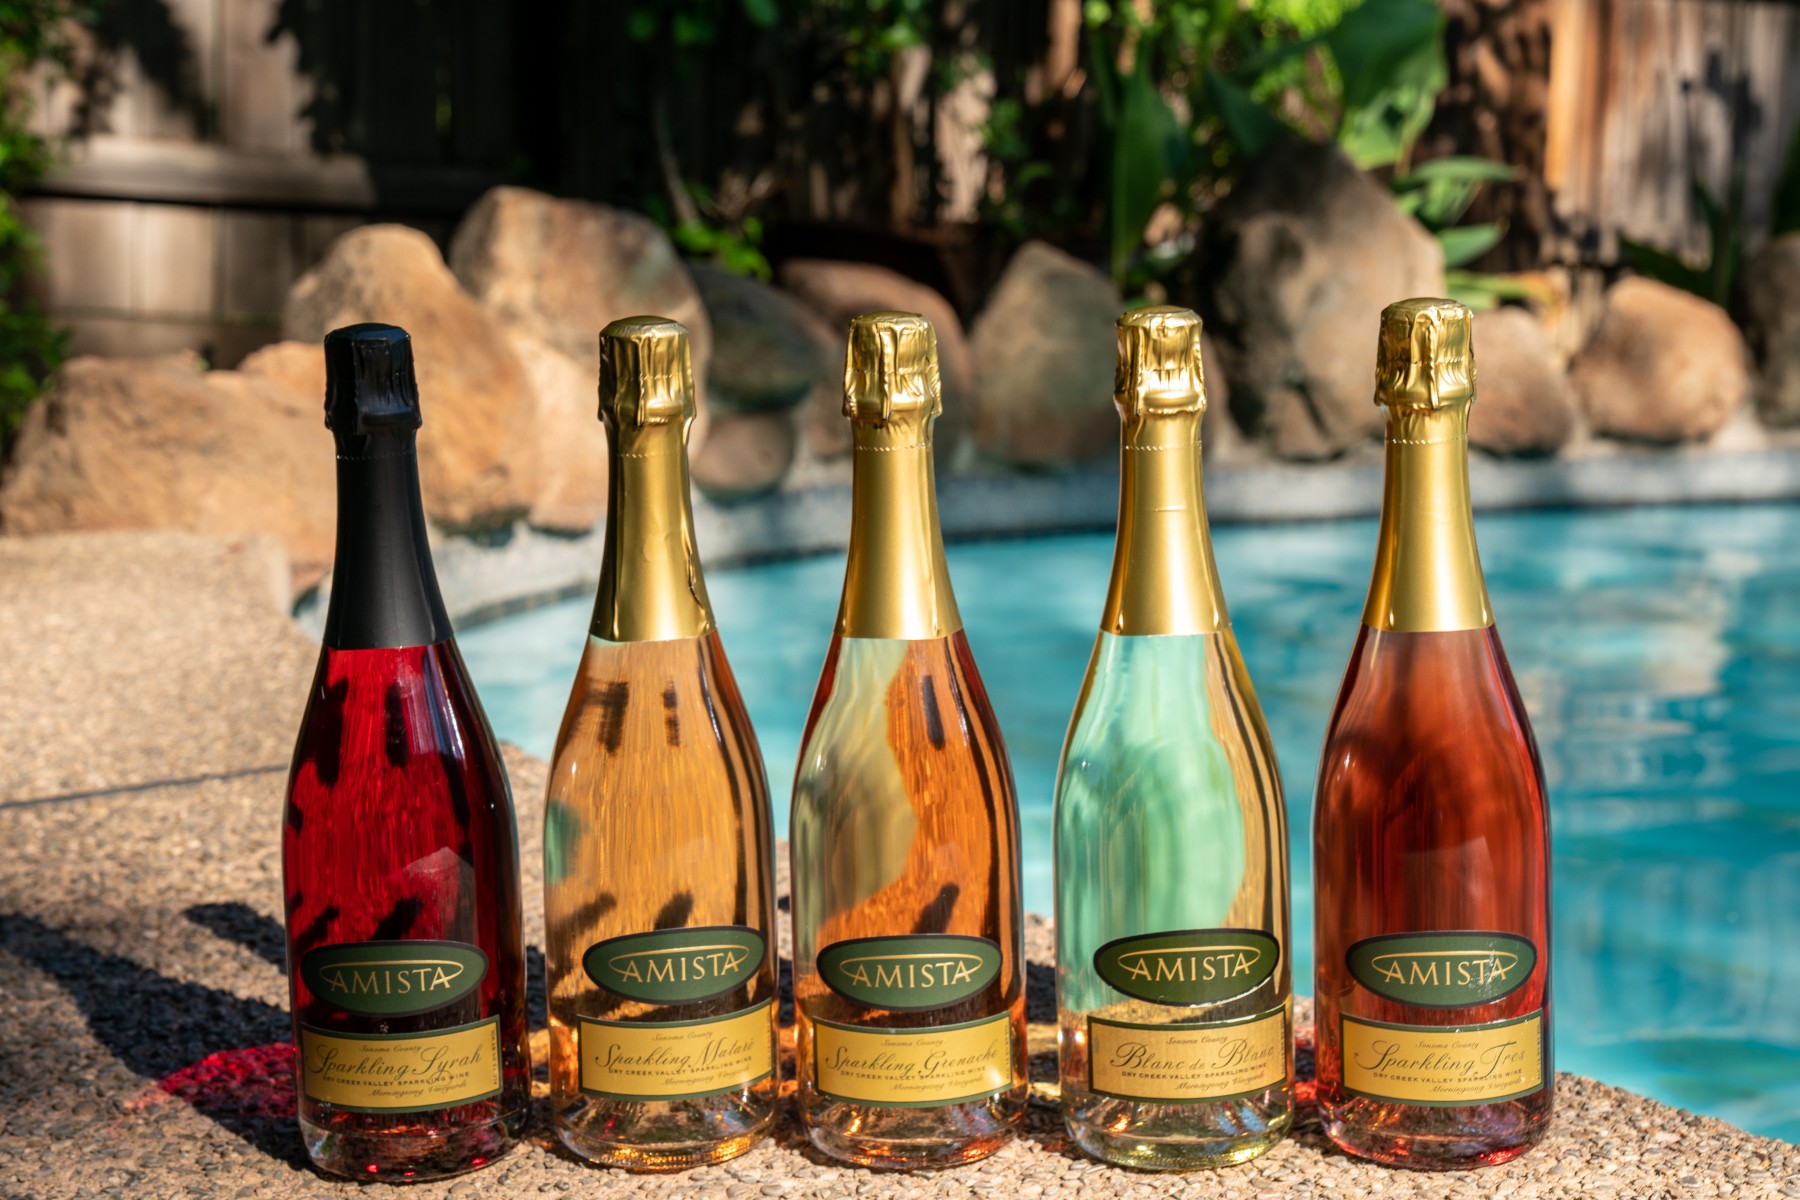 Amista Wine Colors of Sparkling Wine Bottles Near Pool